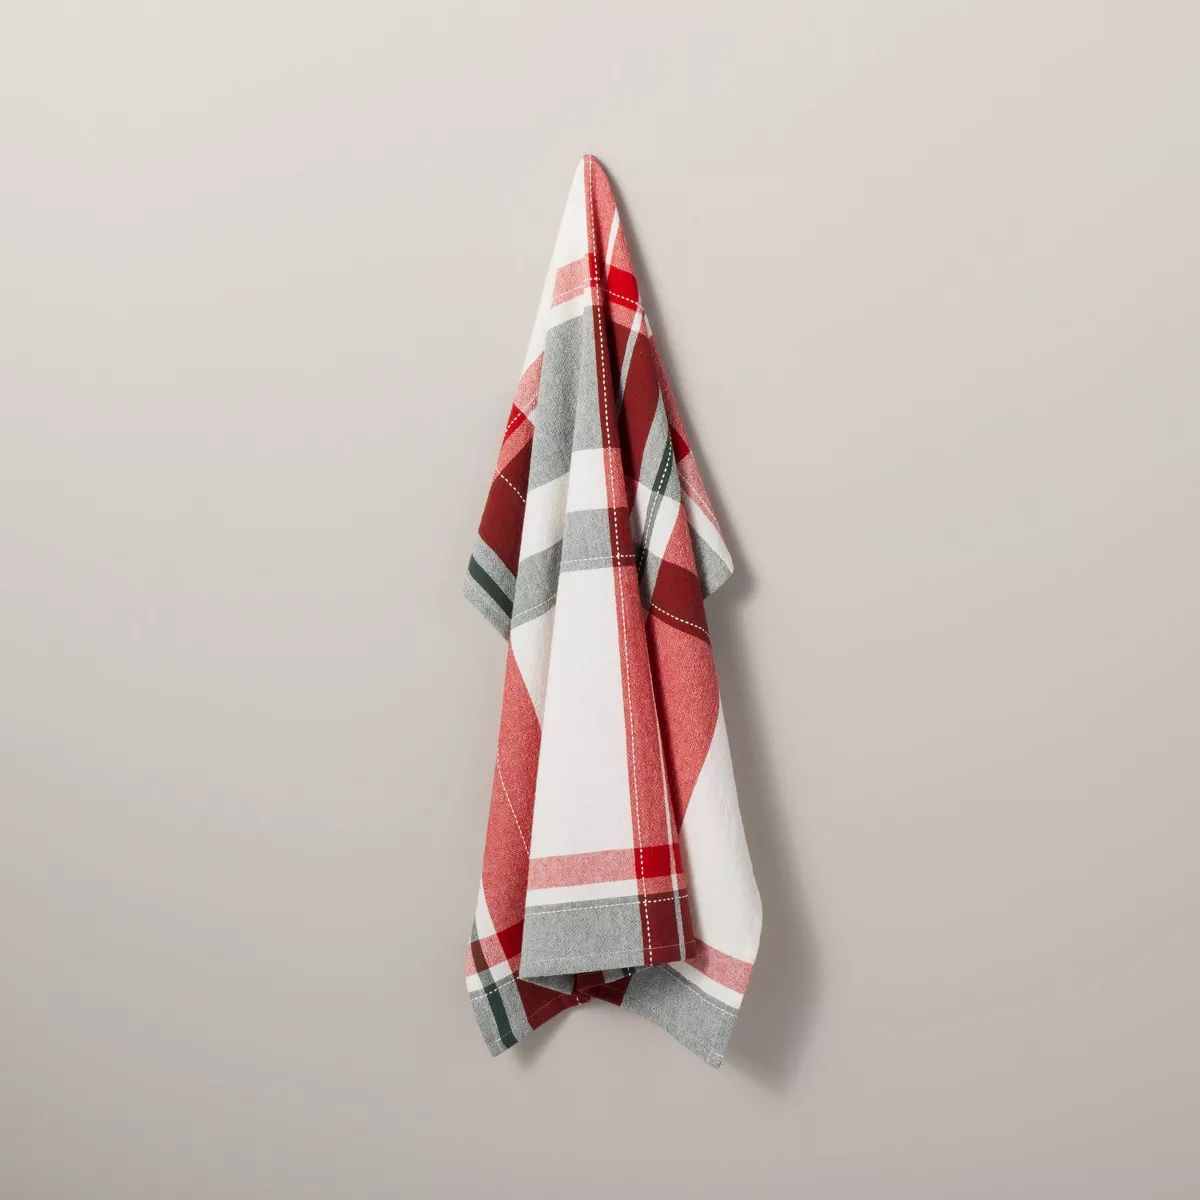 Festive Plaid Flour Sack Christmas Kitchen Towel Red/Green/Cream - Hearth & Hand™ with Magnolia | Target